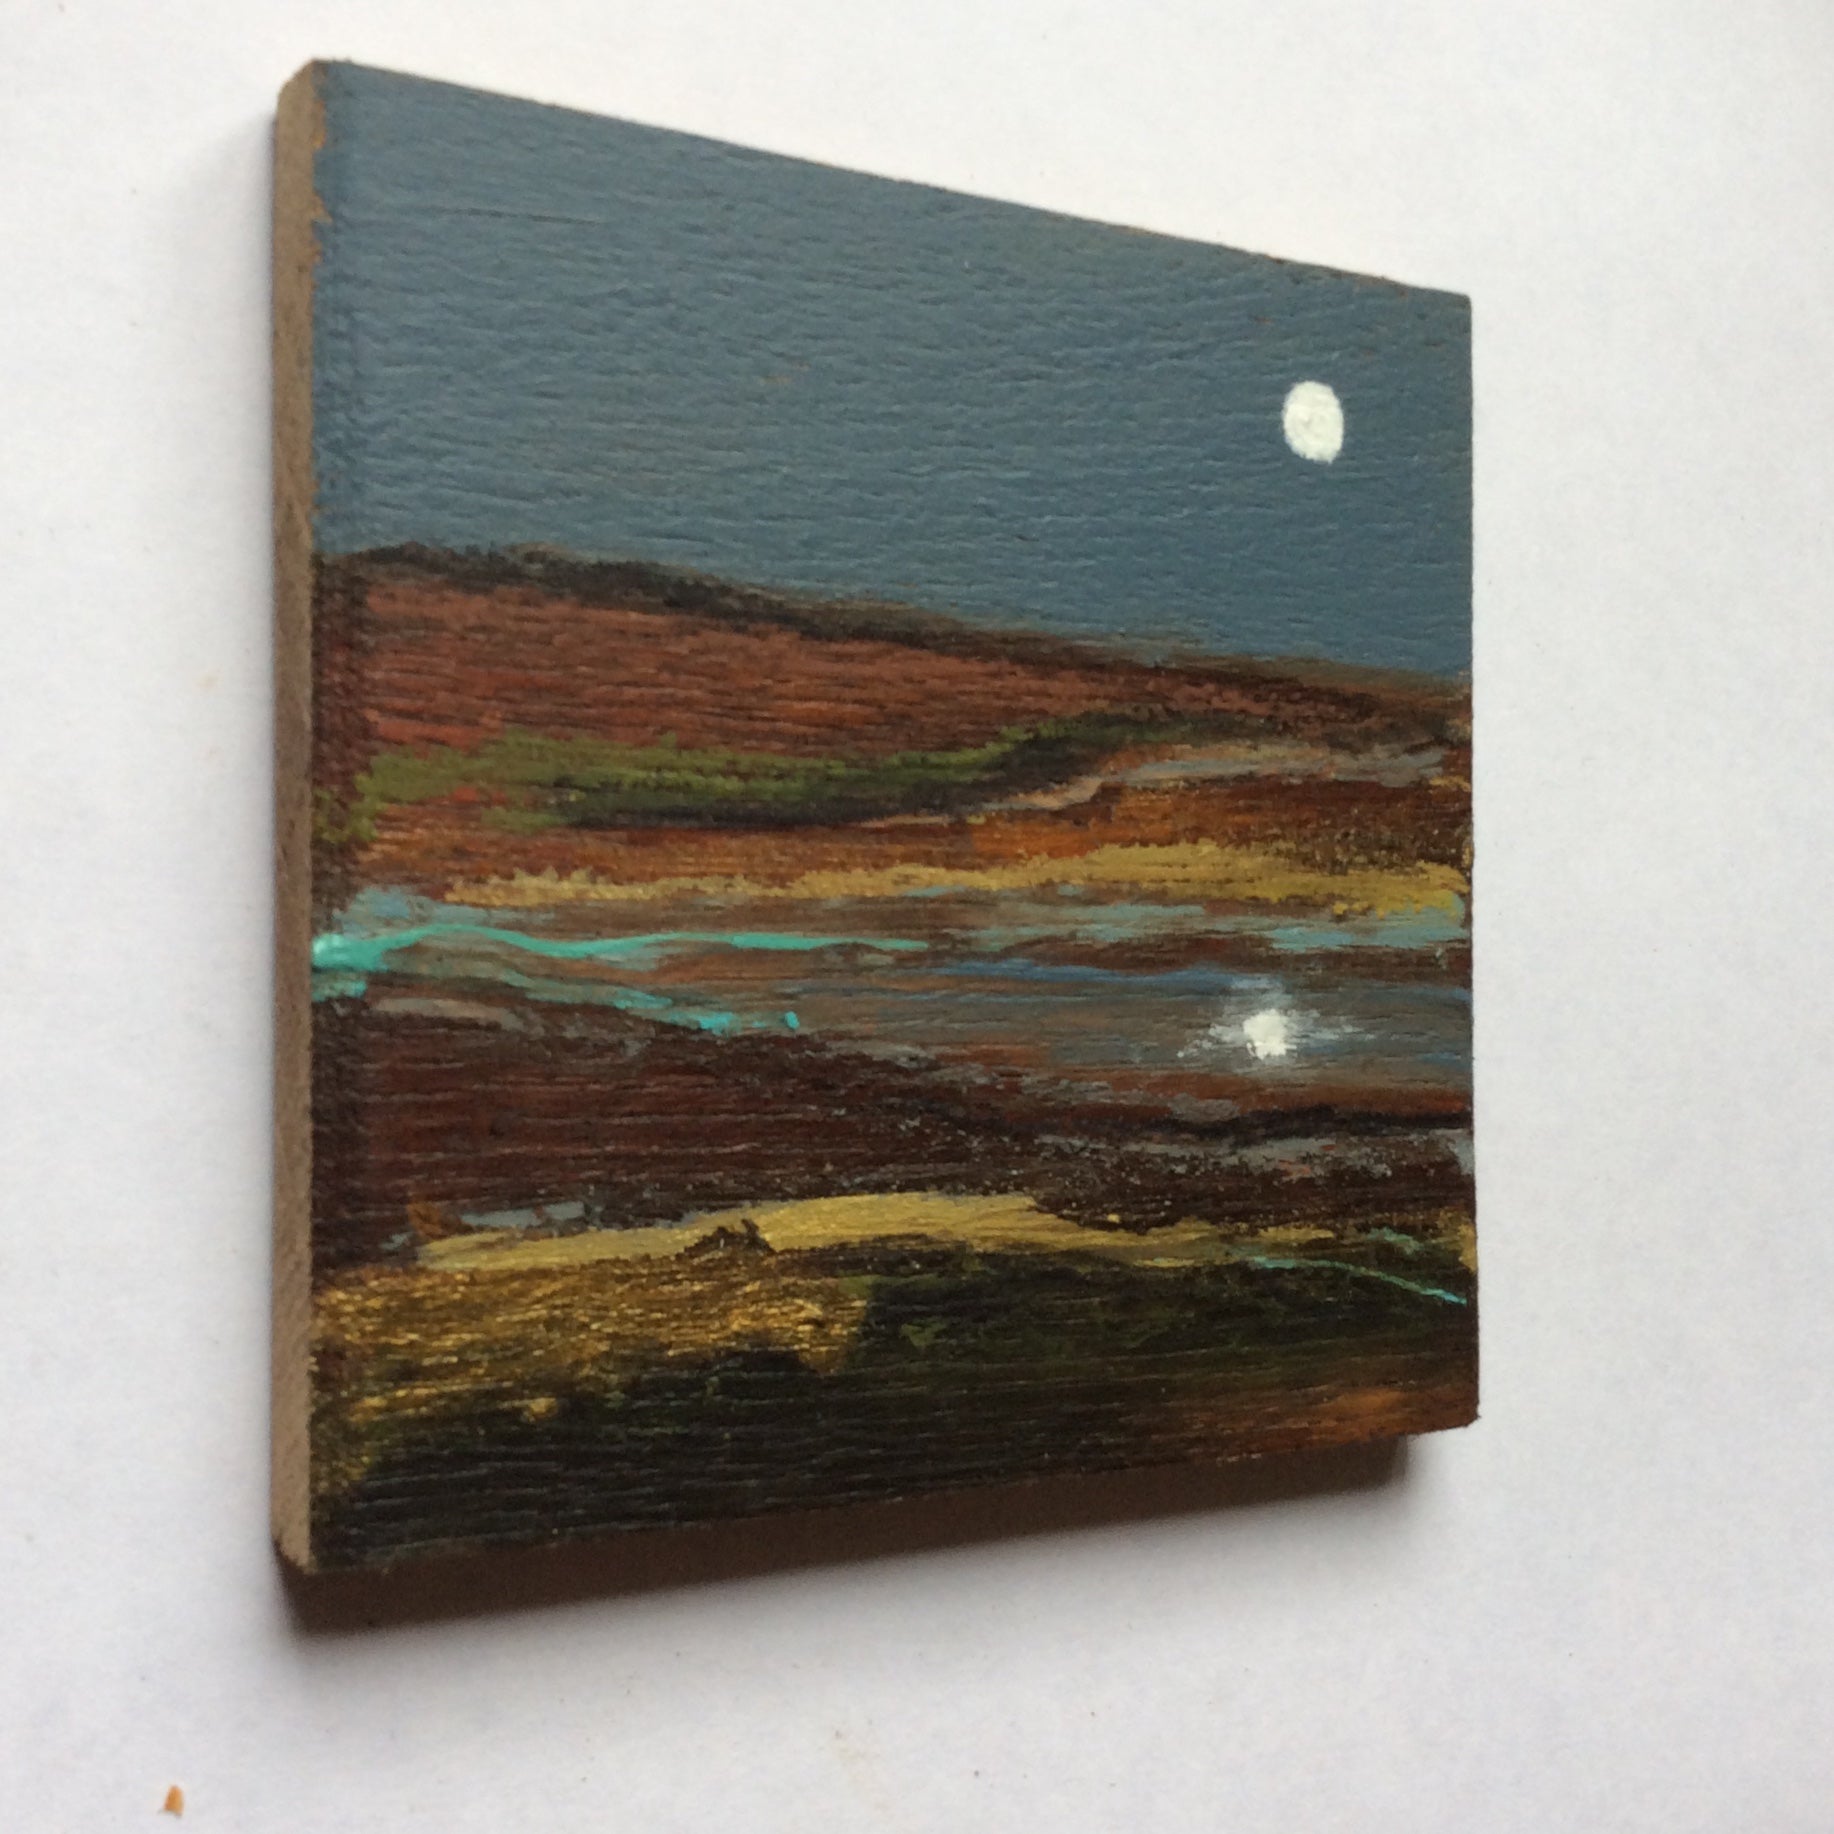 Mixed Media Art on wood By Louise O'Hara - "Reflections on an Autumn brook”